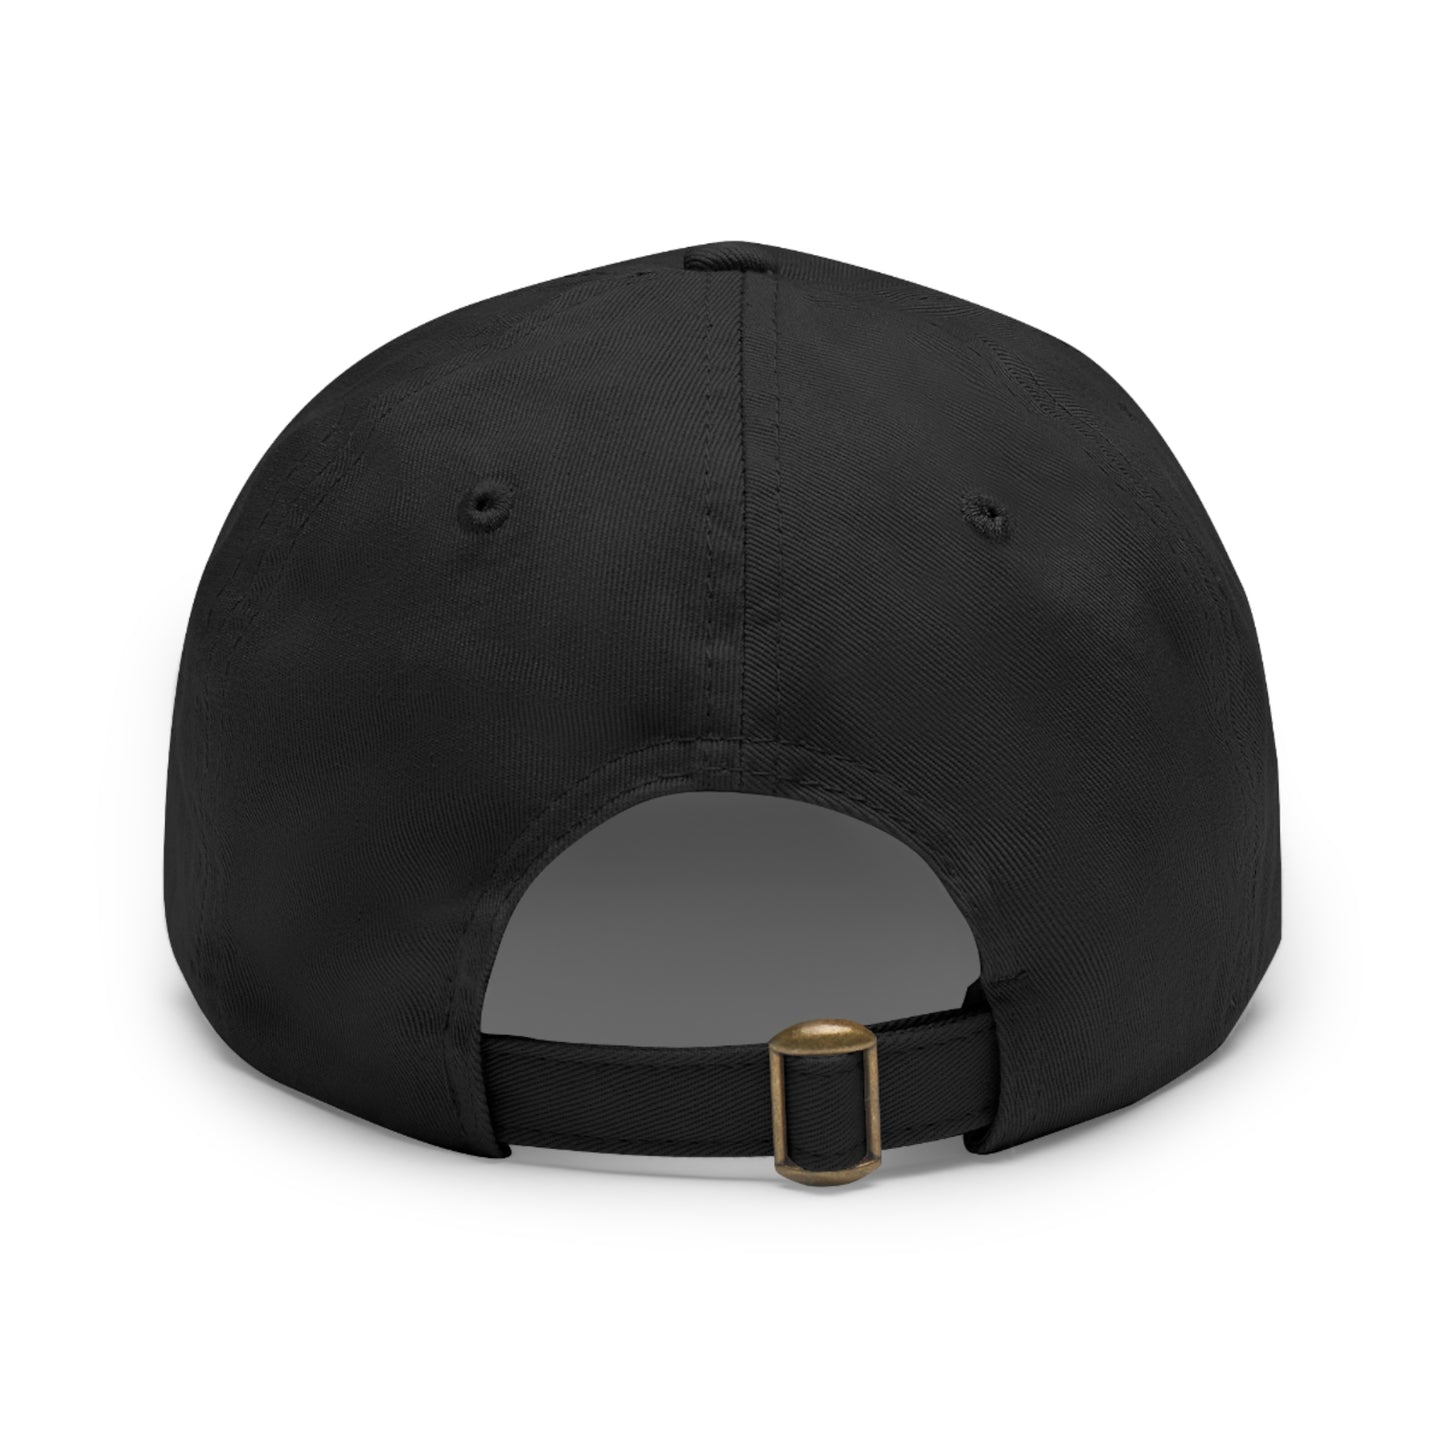 Loon Dad Hat with Leather Patch (Rectangle)